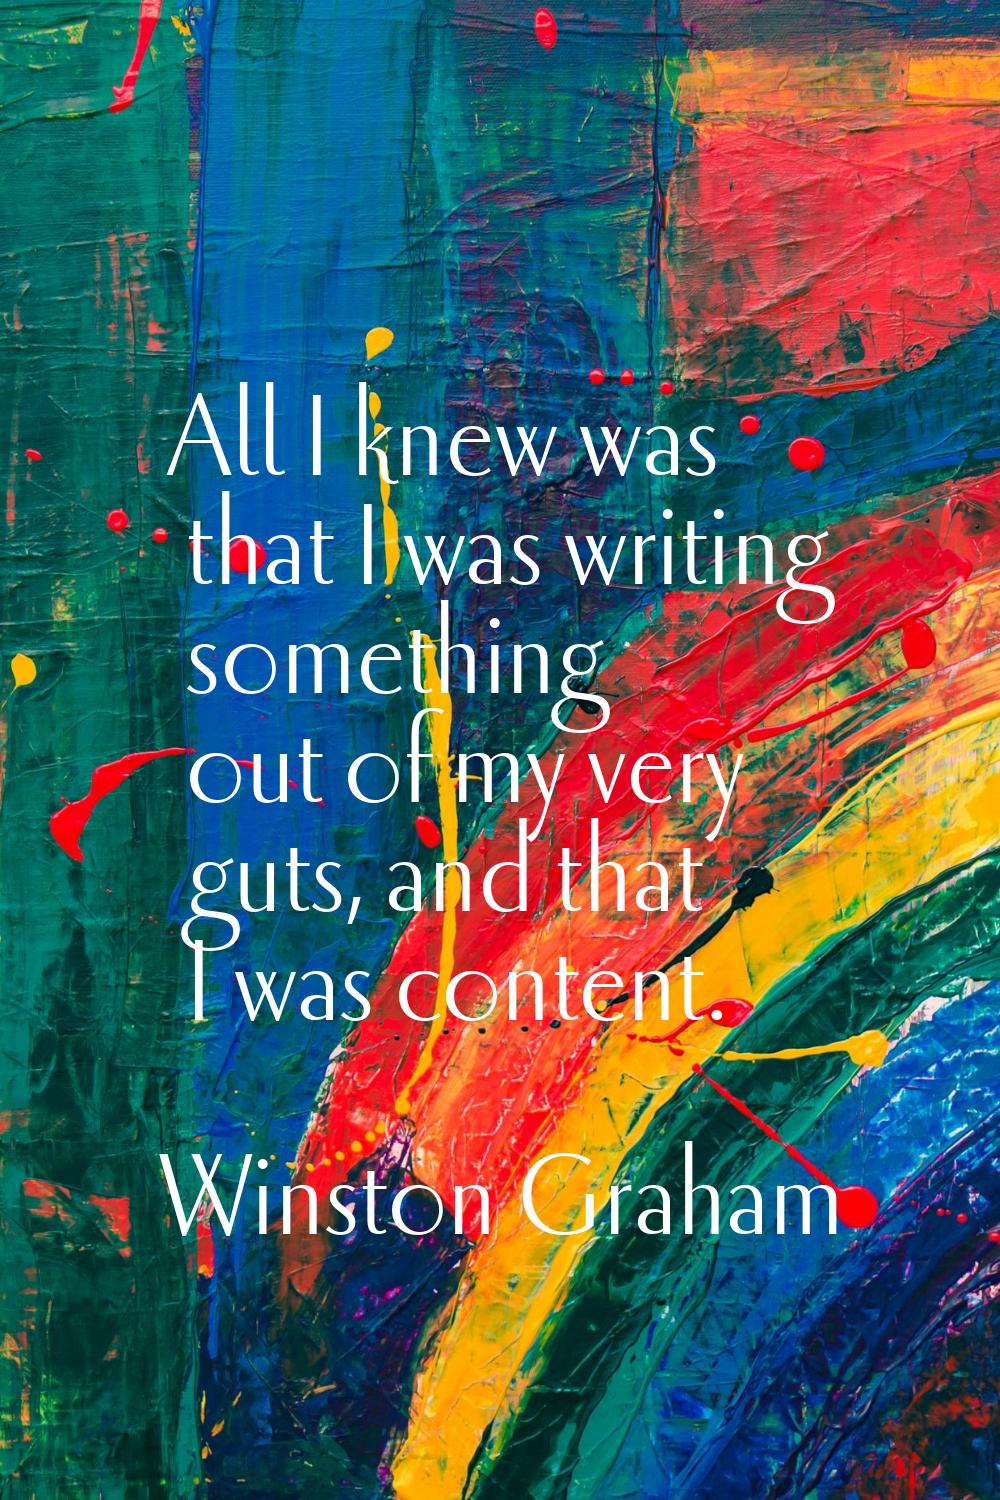 All I knew was that I was writing something out of my very guts, and that I was content.